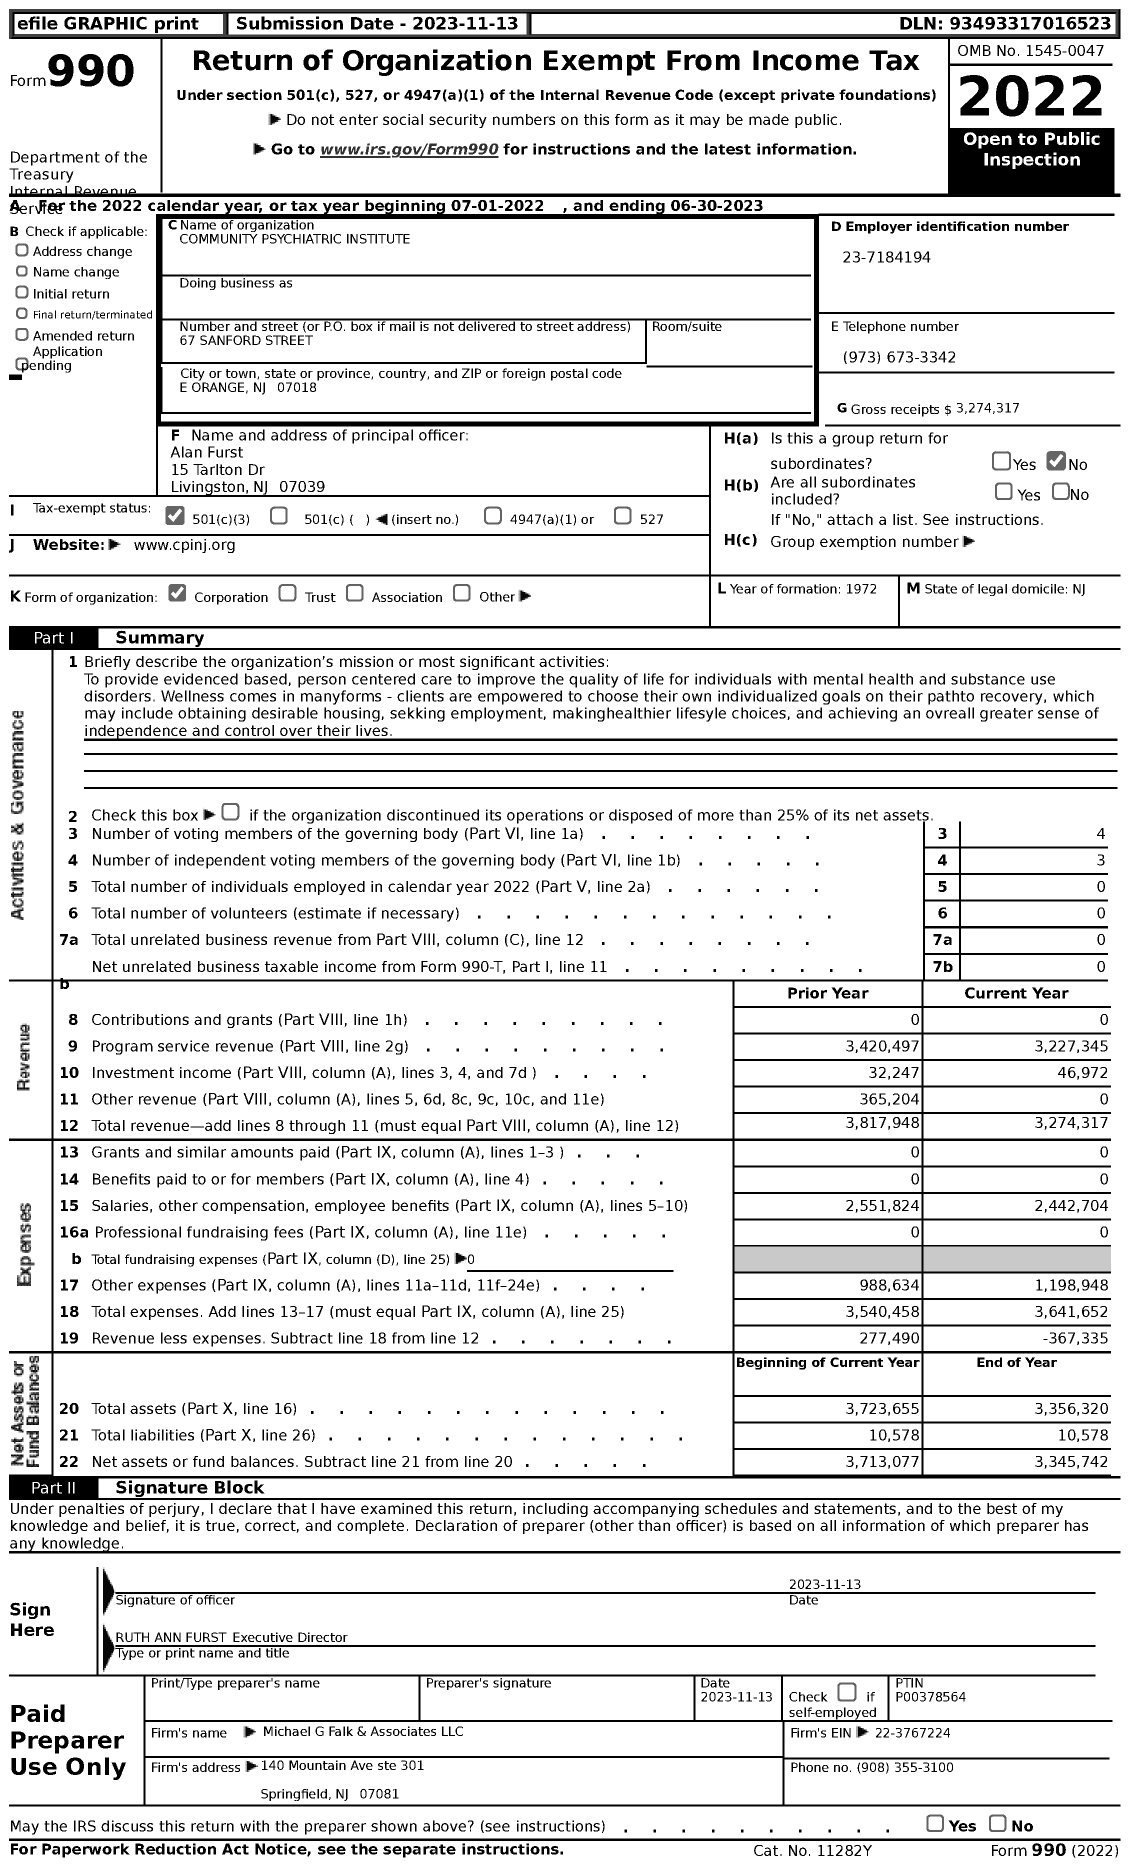 Image of first page of 2022 Form 990 for Community Psychiatric Institute (CPI)